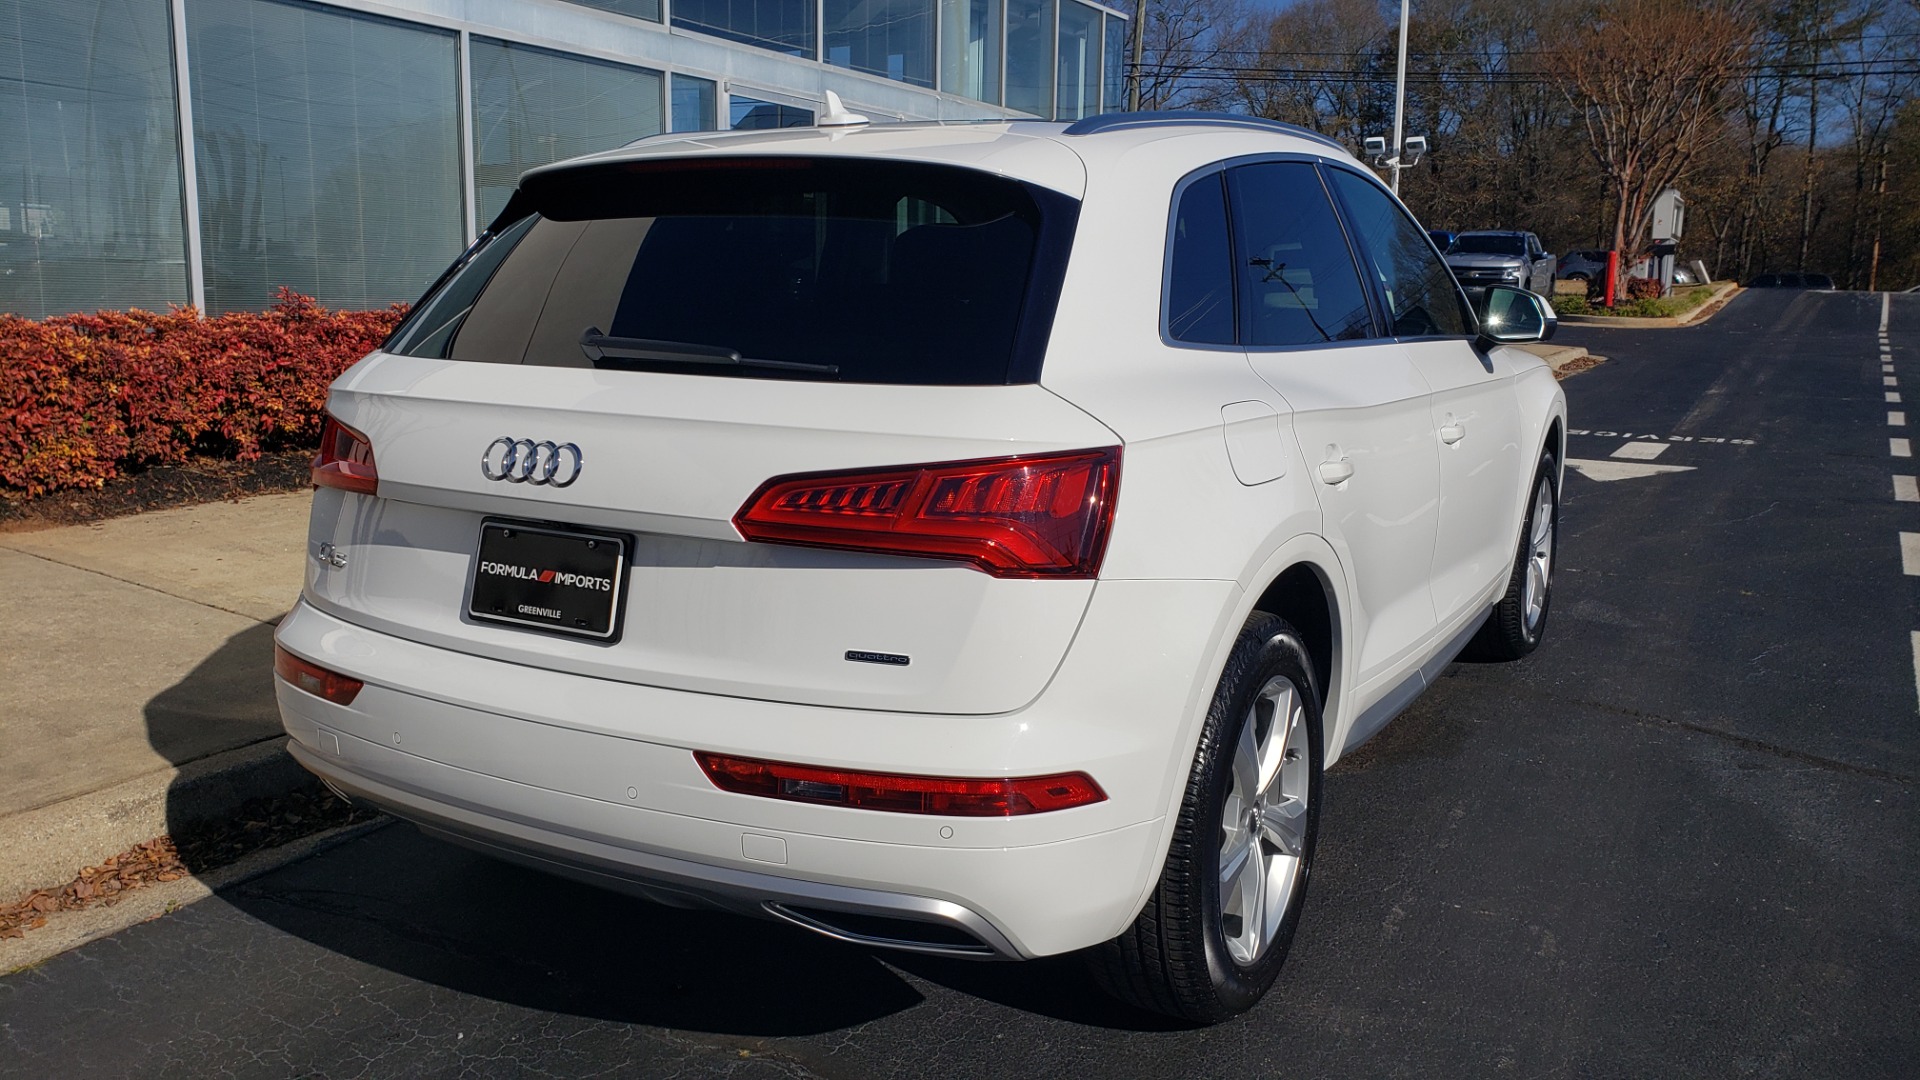 Used 2019 Audi Q5 PREMIUM PLUS 2.0L / AWD / NAV / PANO-ROOF / DRVR ASST / REARVIEW for sale $32,000 at Formula Imports in Charlotte NC 28227 8